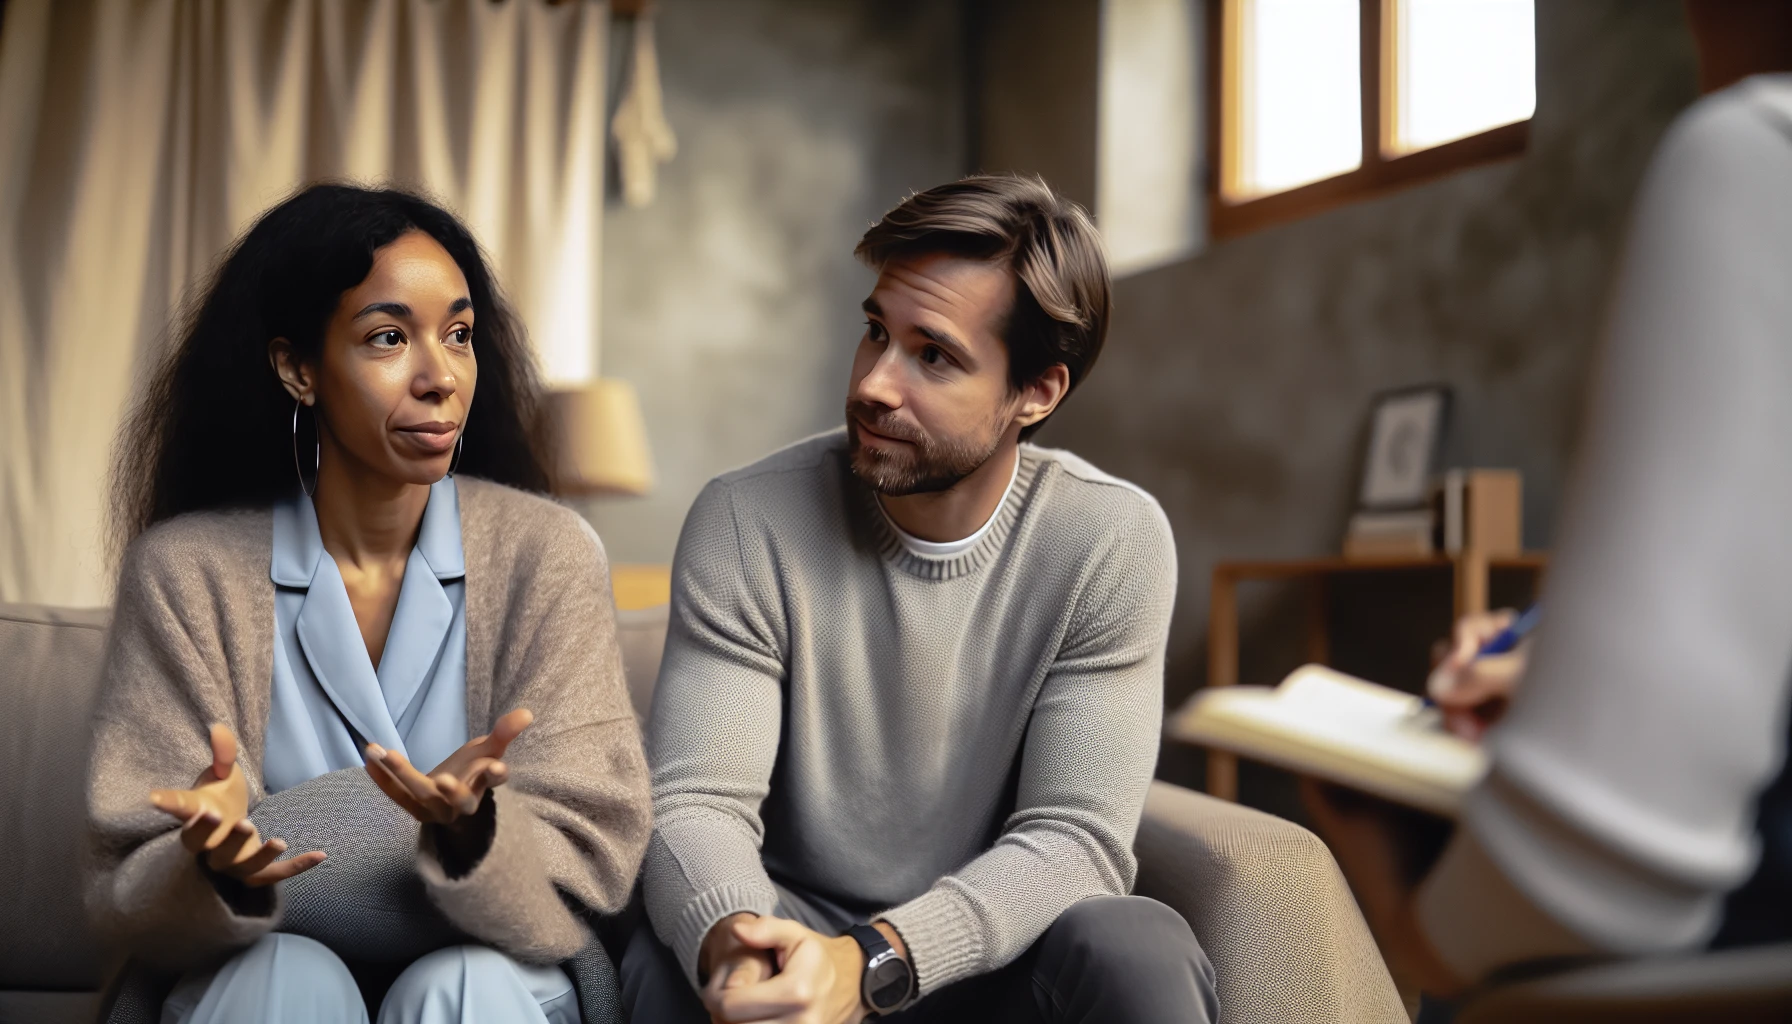 Strengthening intimacy in marriage counseling